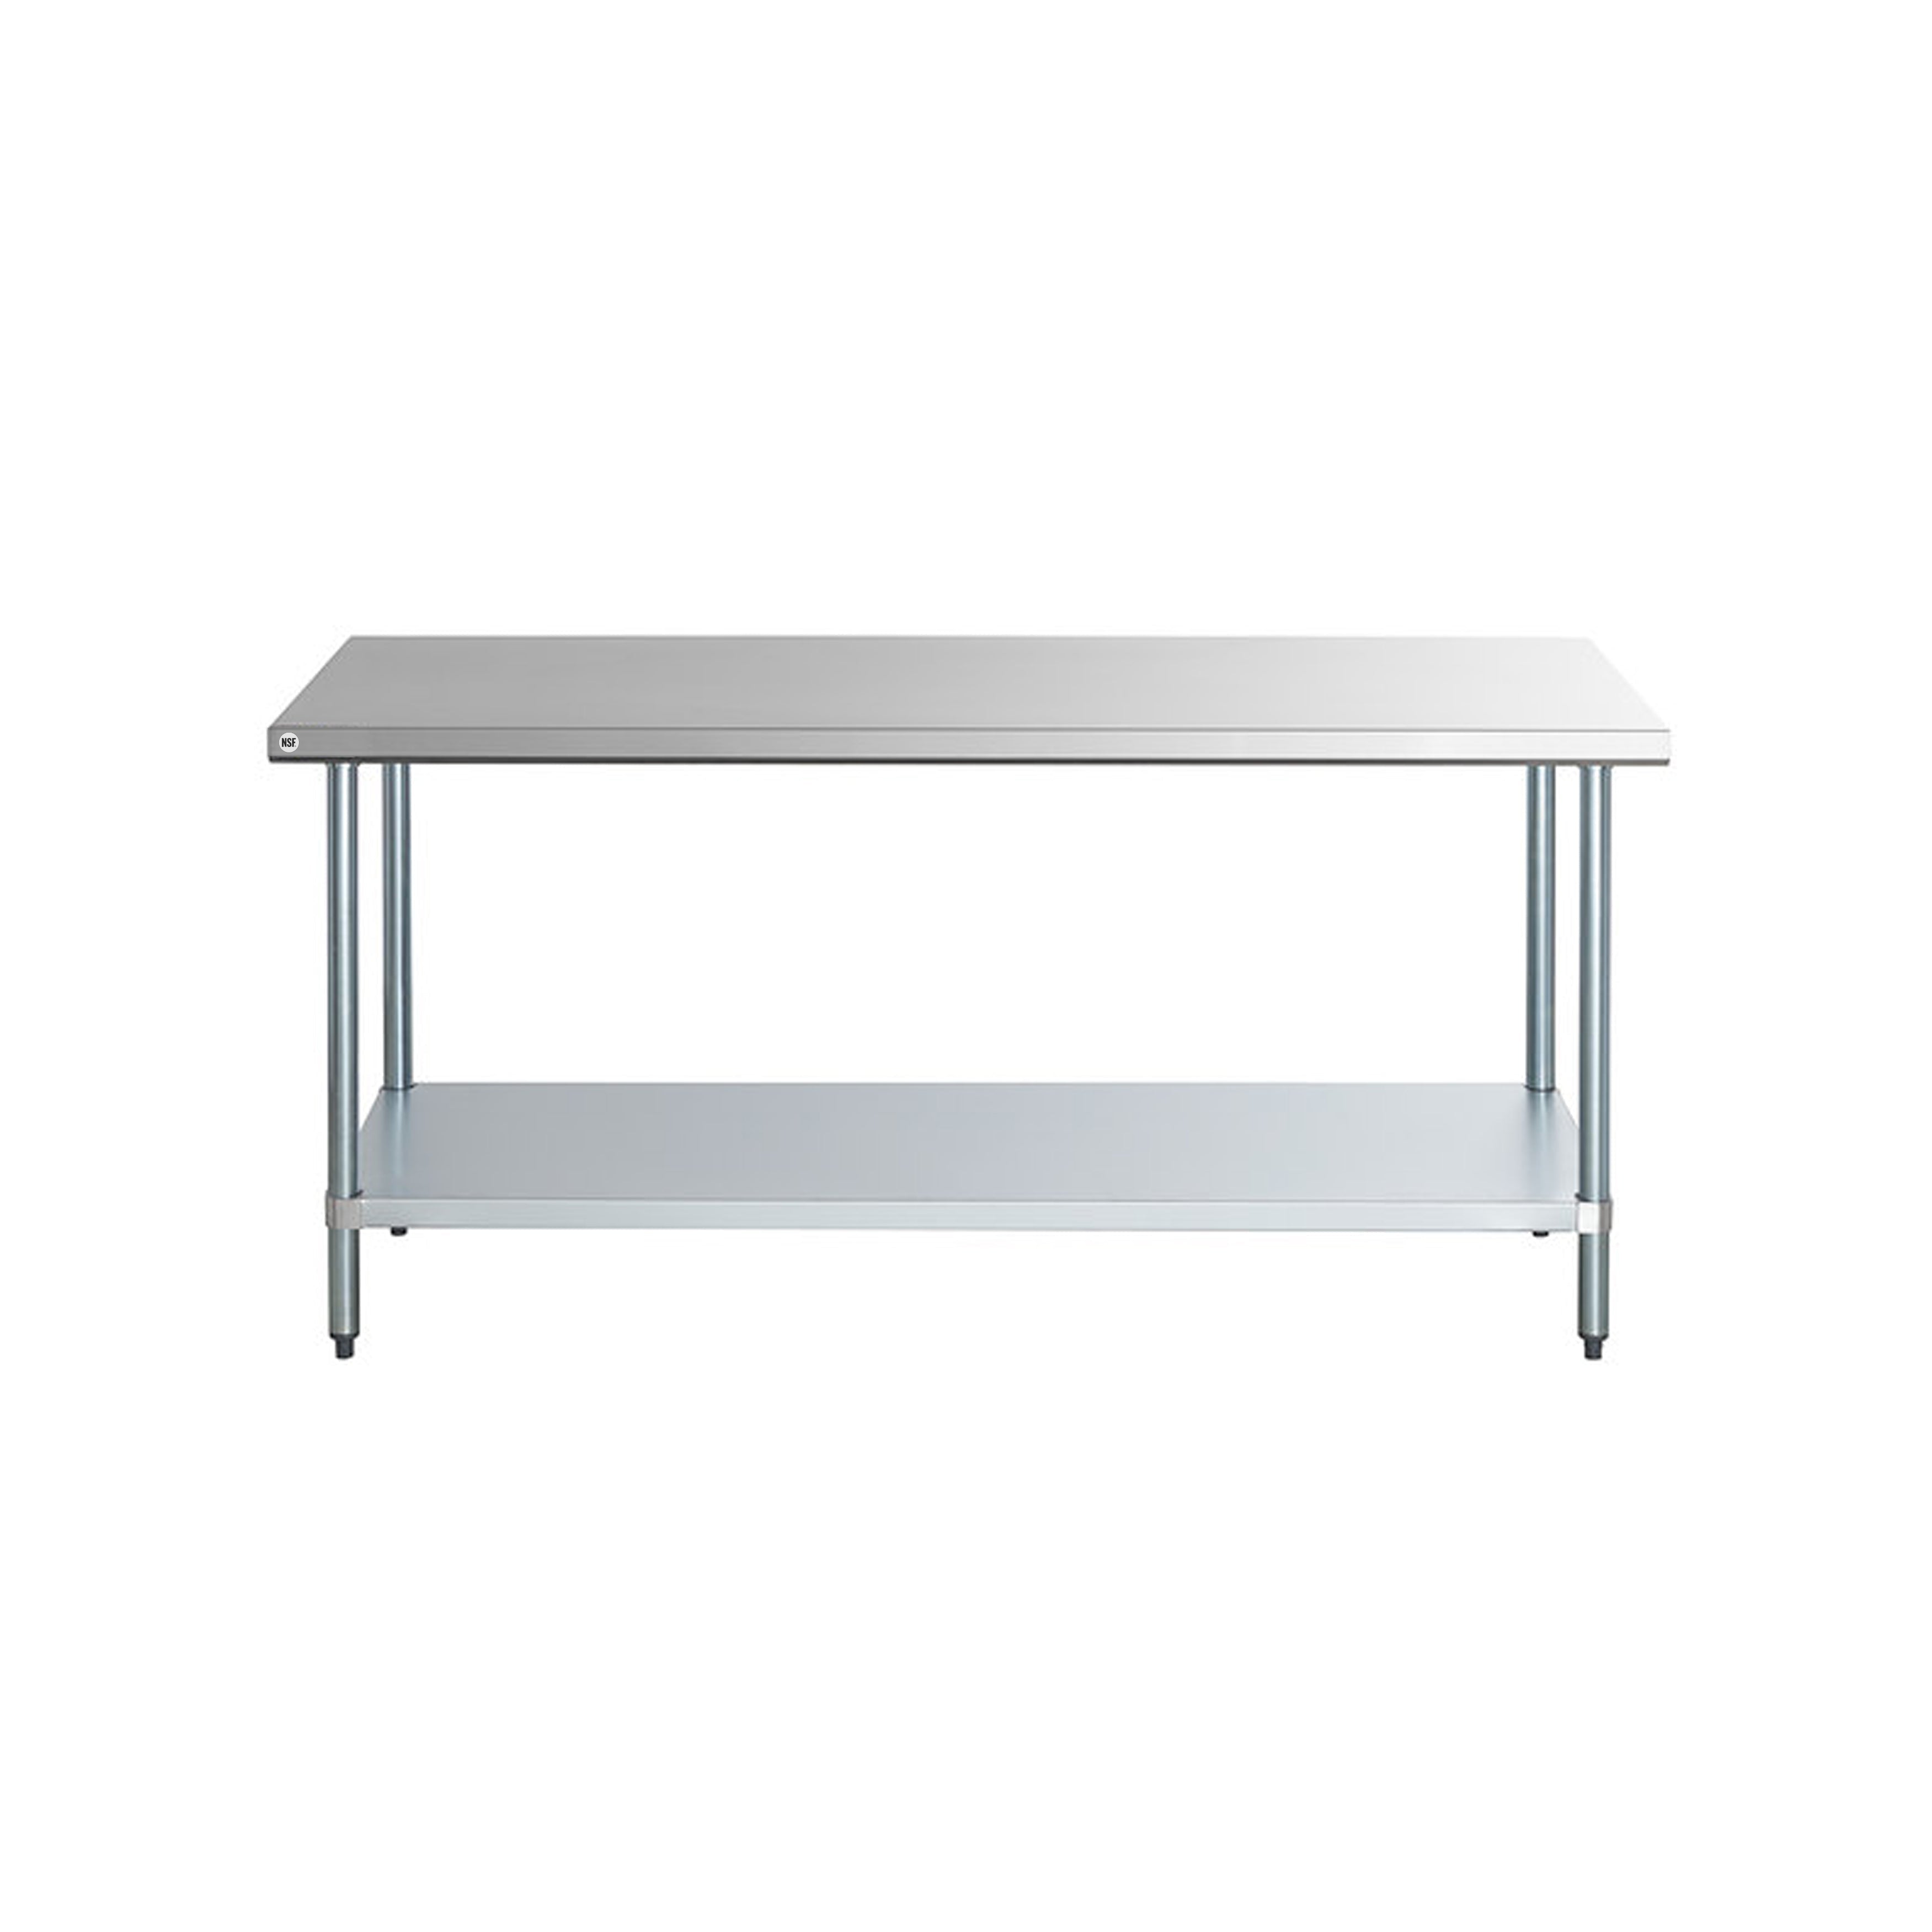 Omcan - 17582, Commercial 72" x 24" Stainless Steel Kitchen Work Table 1200lbs Medium Duty